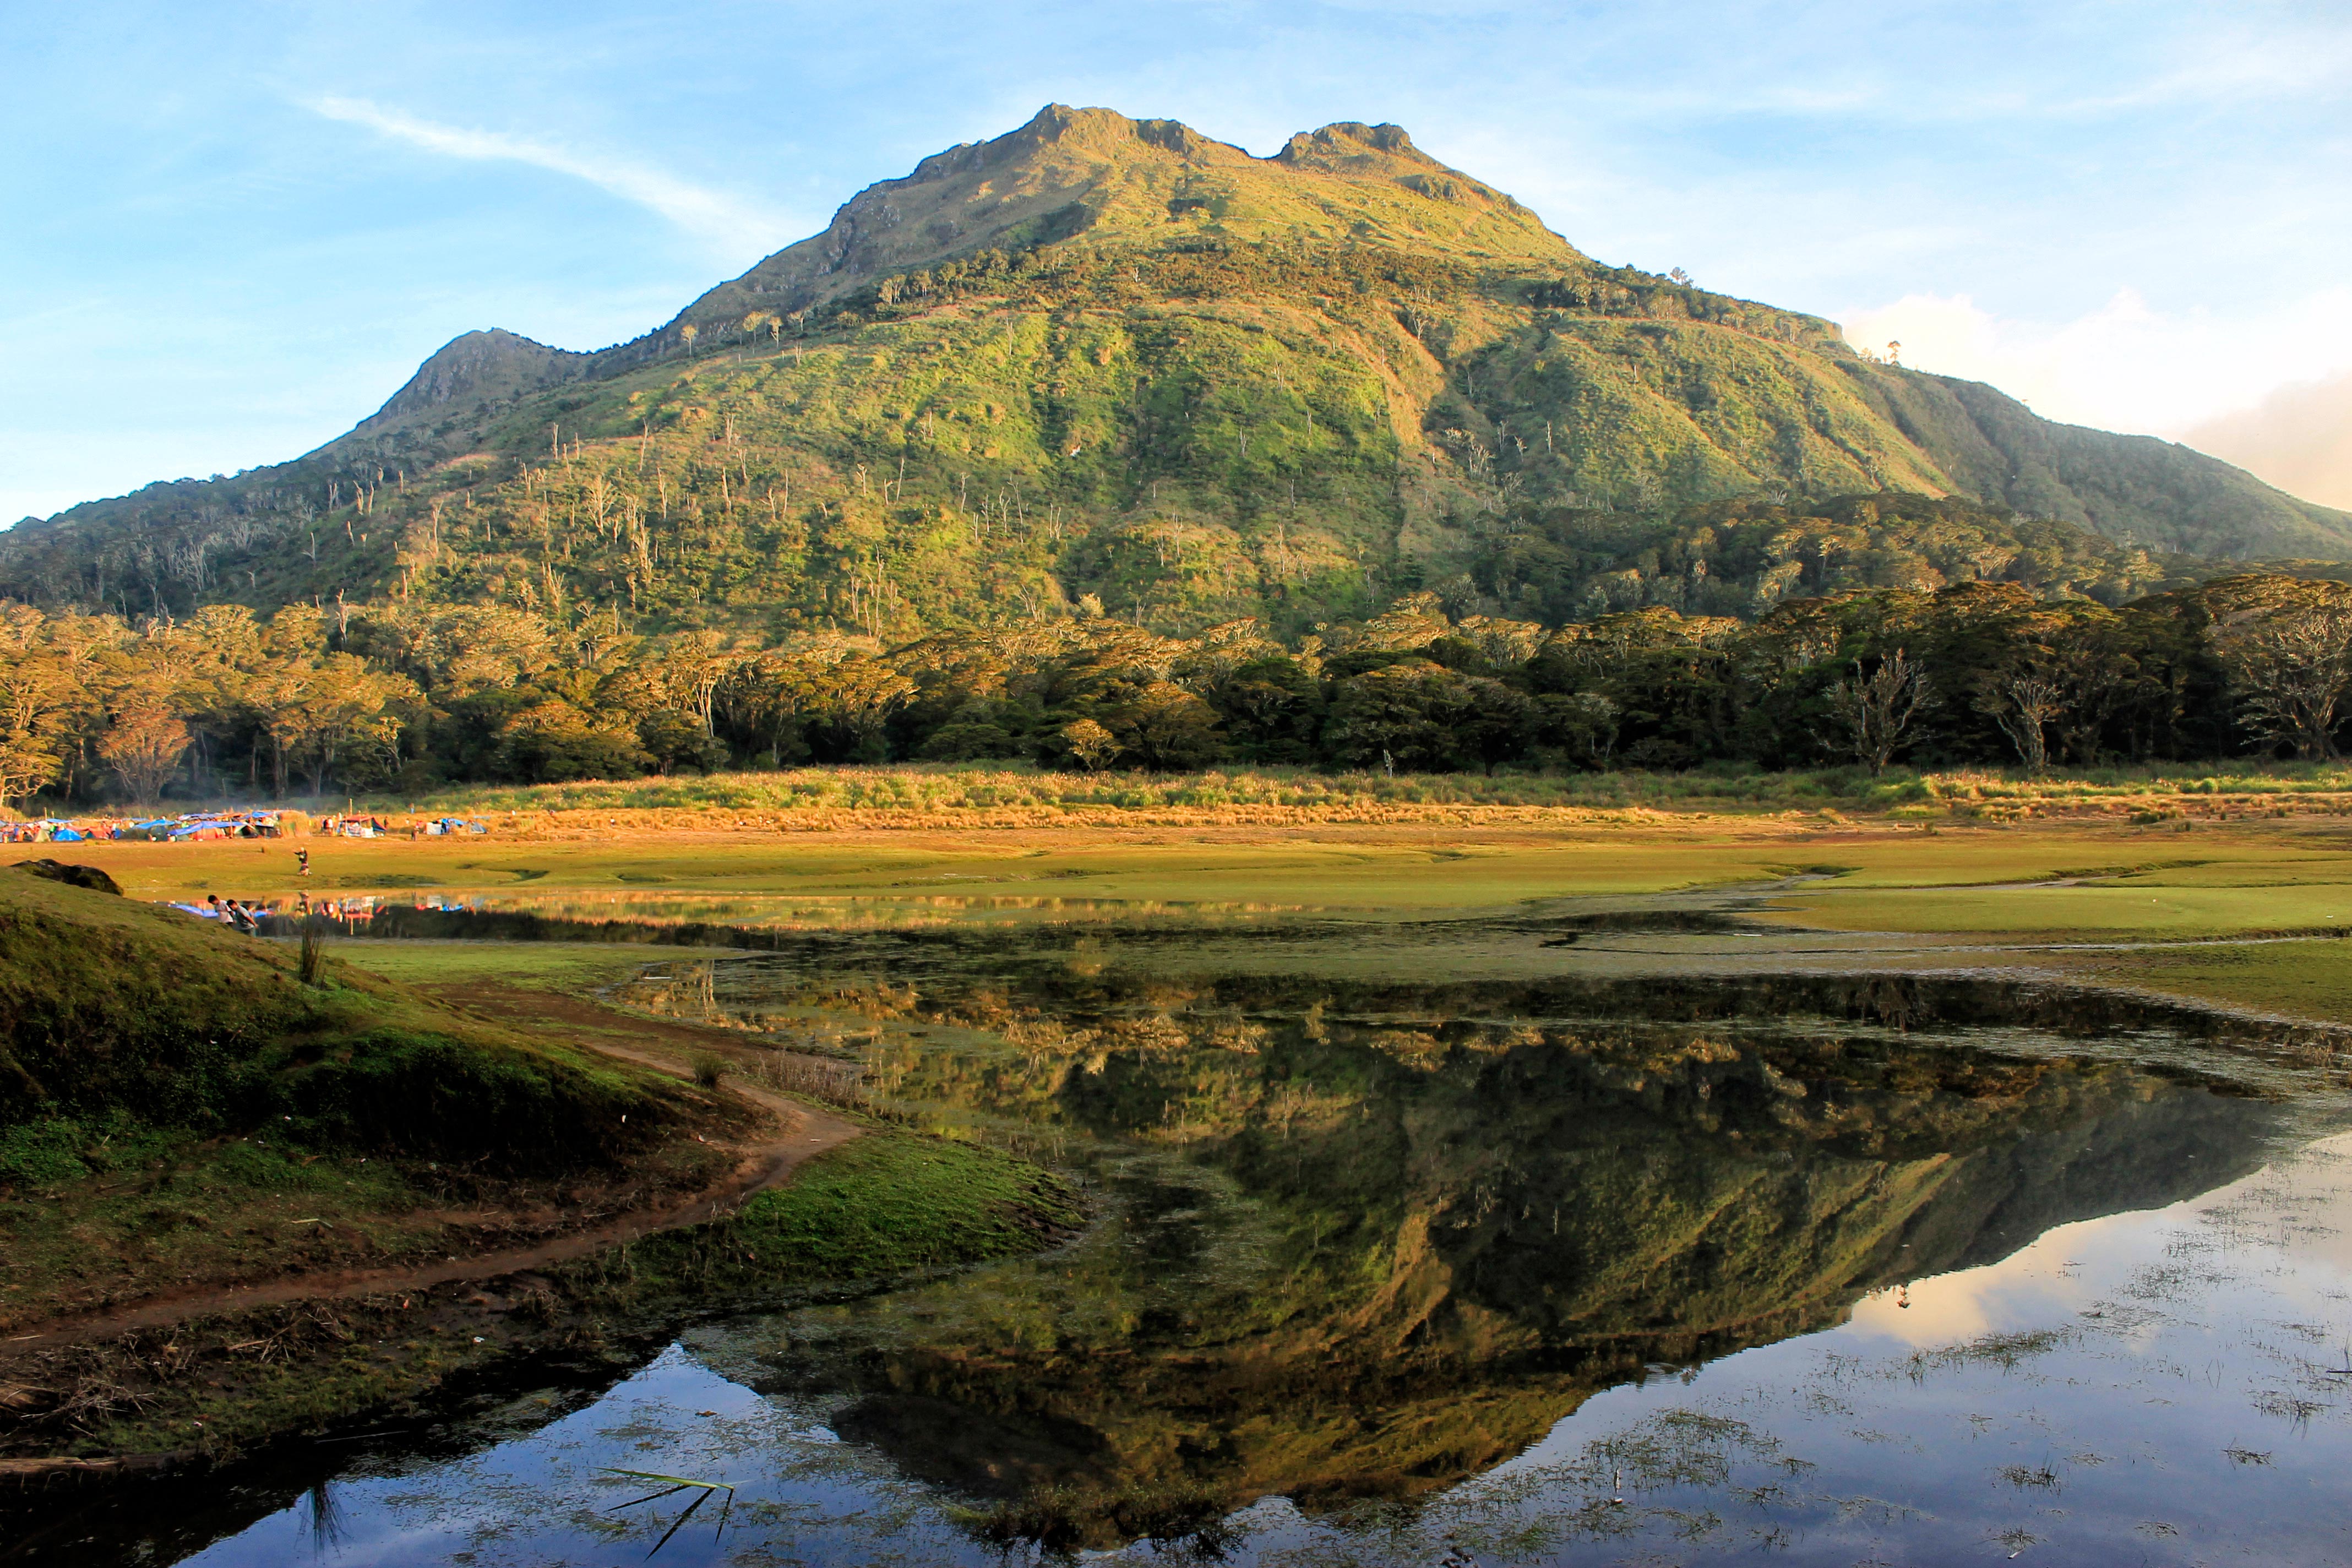 A visit to Mt Apo, experiencing a world within a world